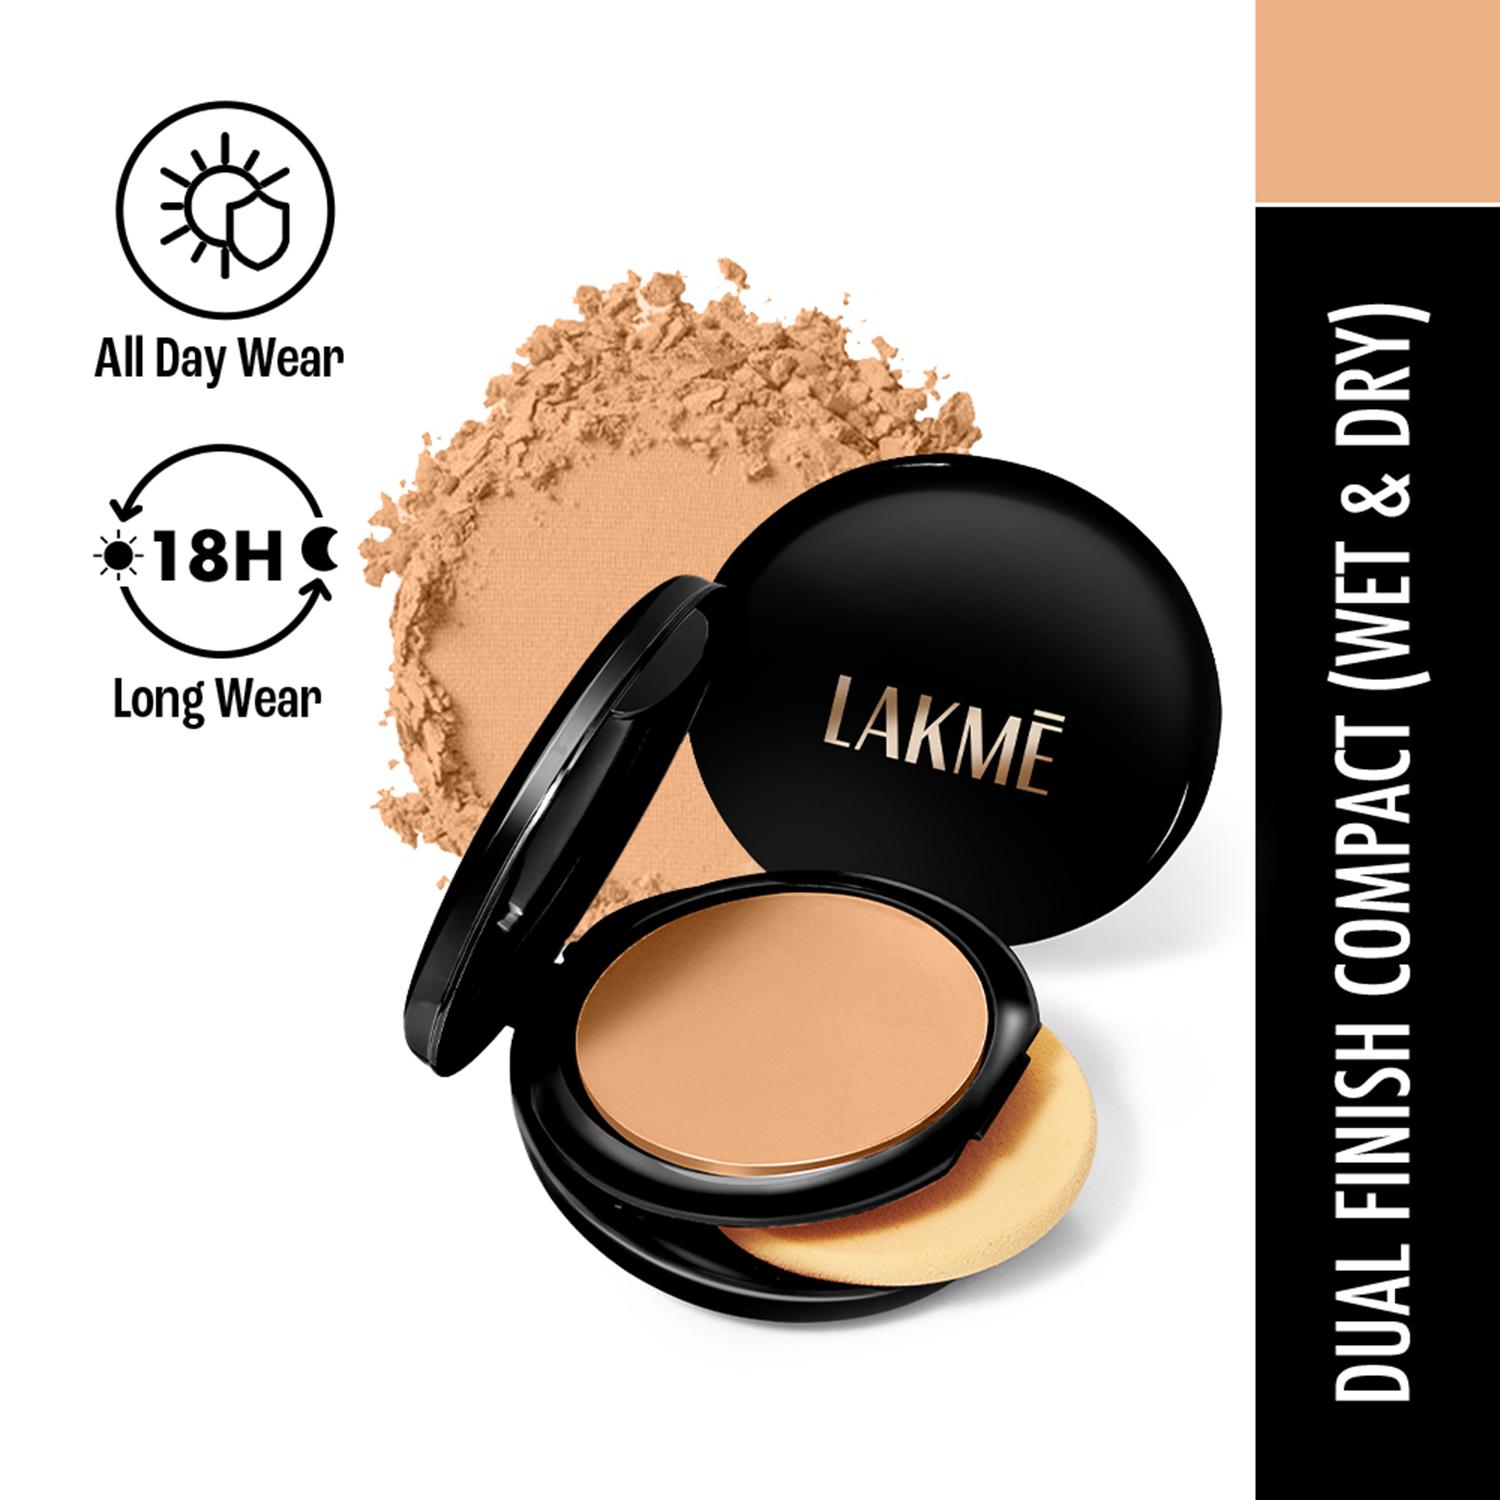 Lakme | Lakme Xtraordin-airy Compact 2 In 1 Compact + Foundation Lightweight SPF17 05 Beige Honey (9 g)